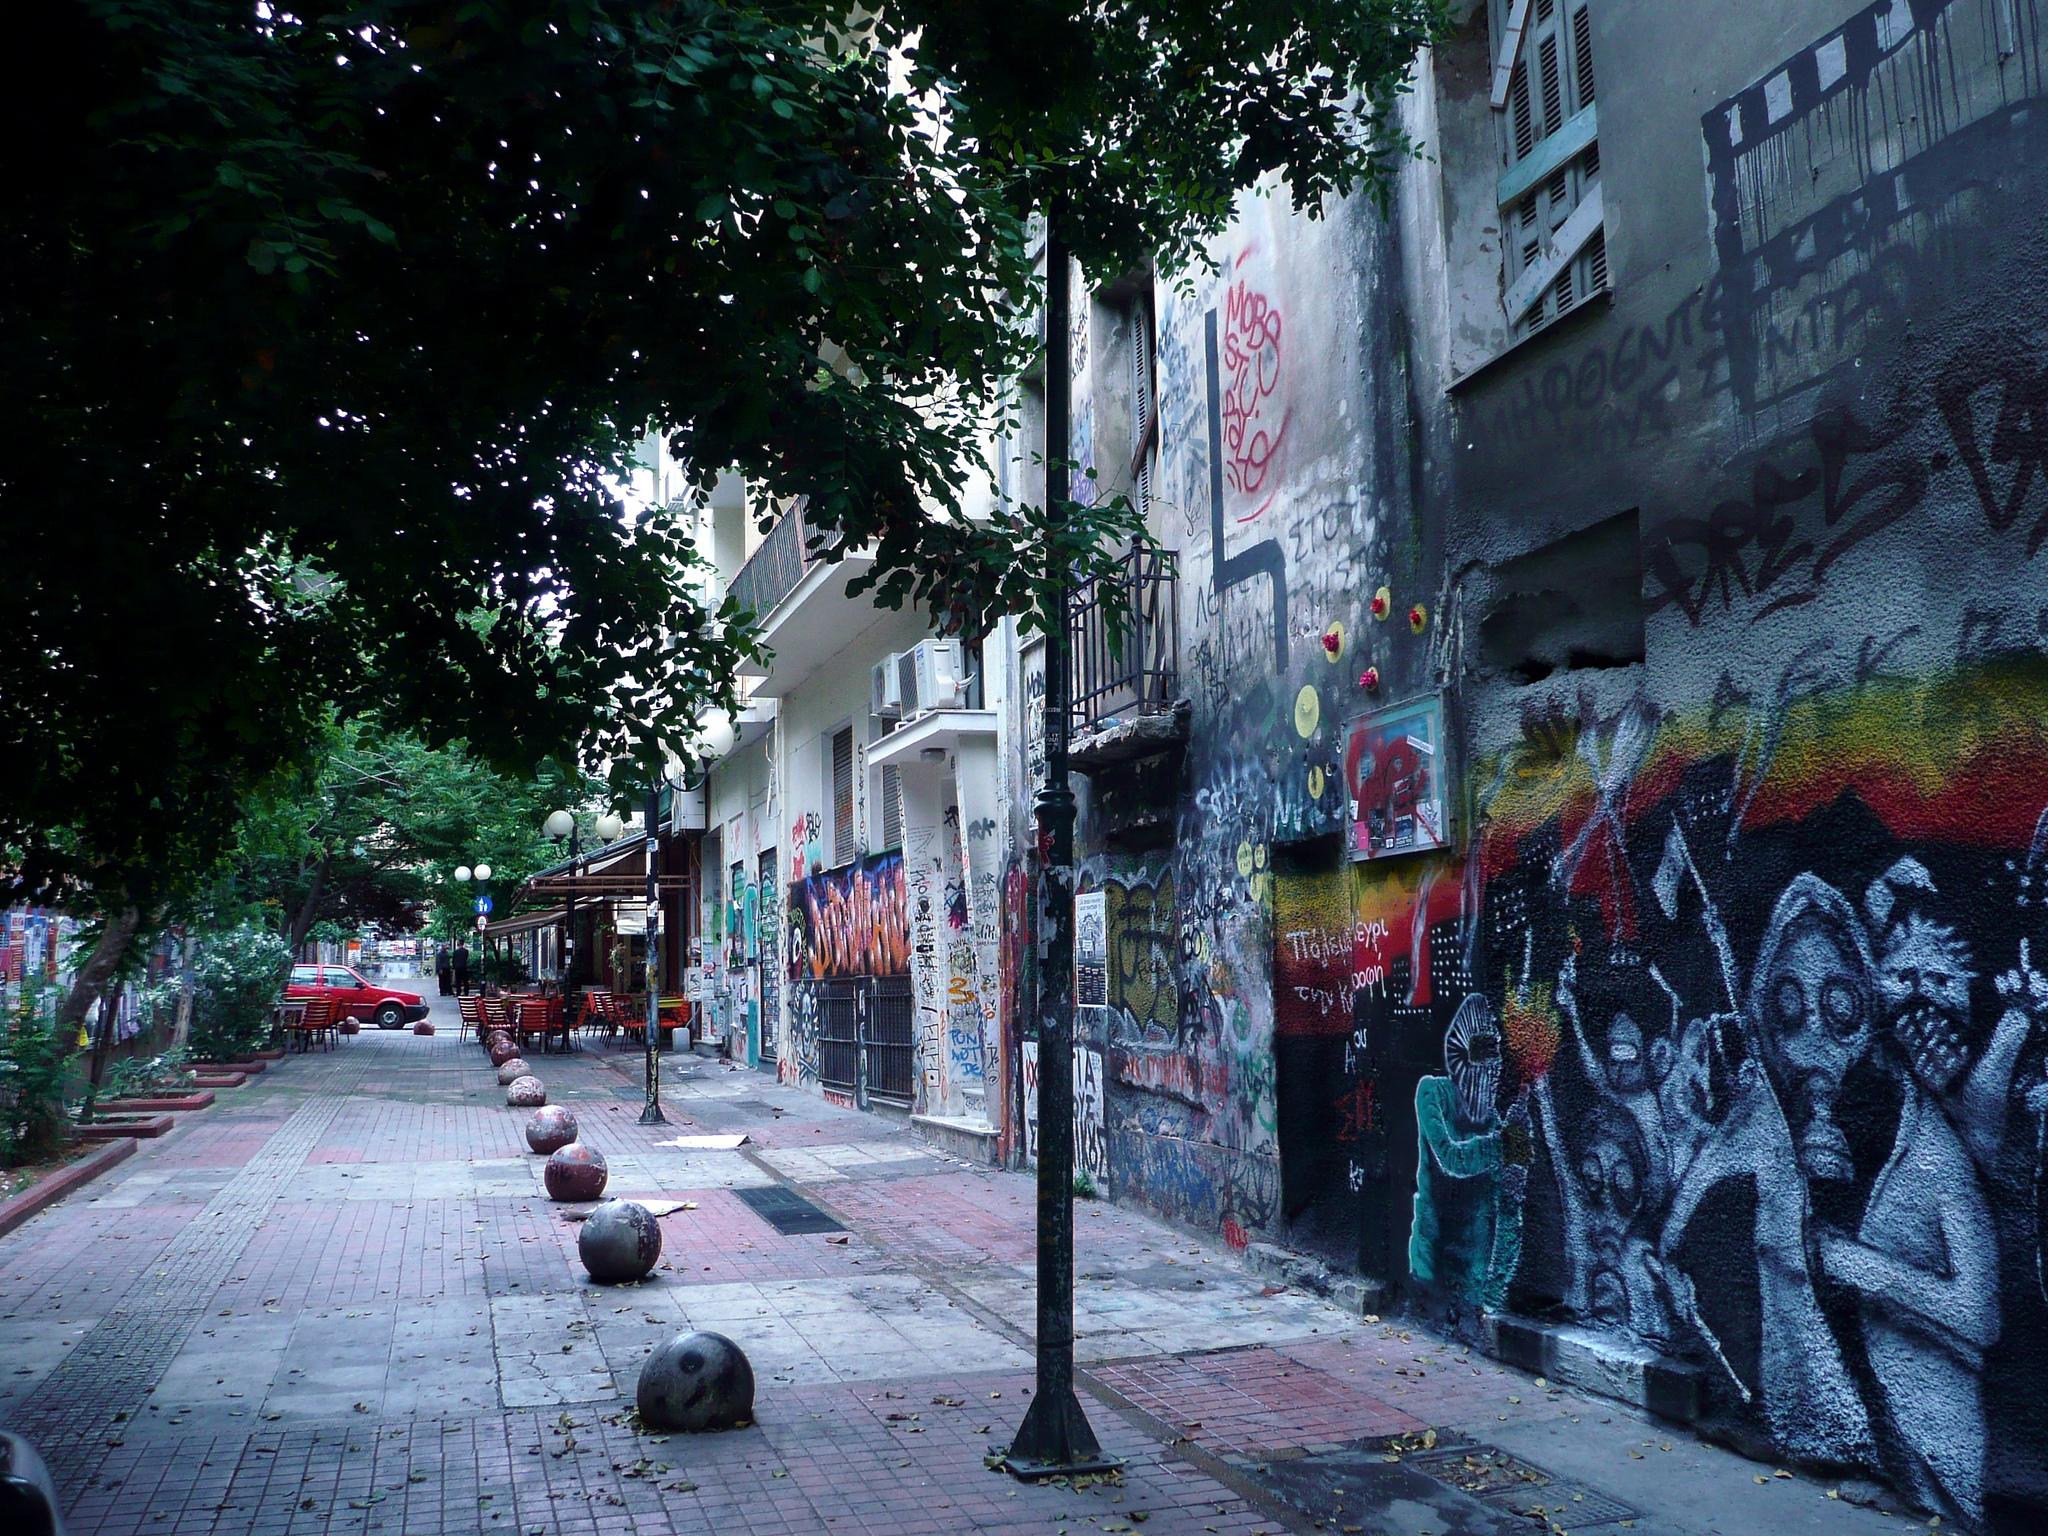 A street in Exarcheia